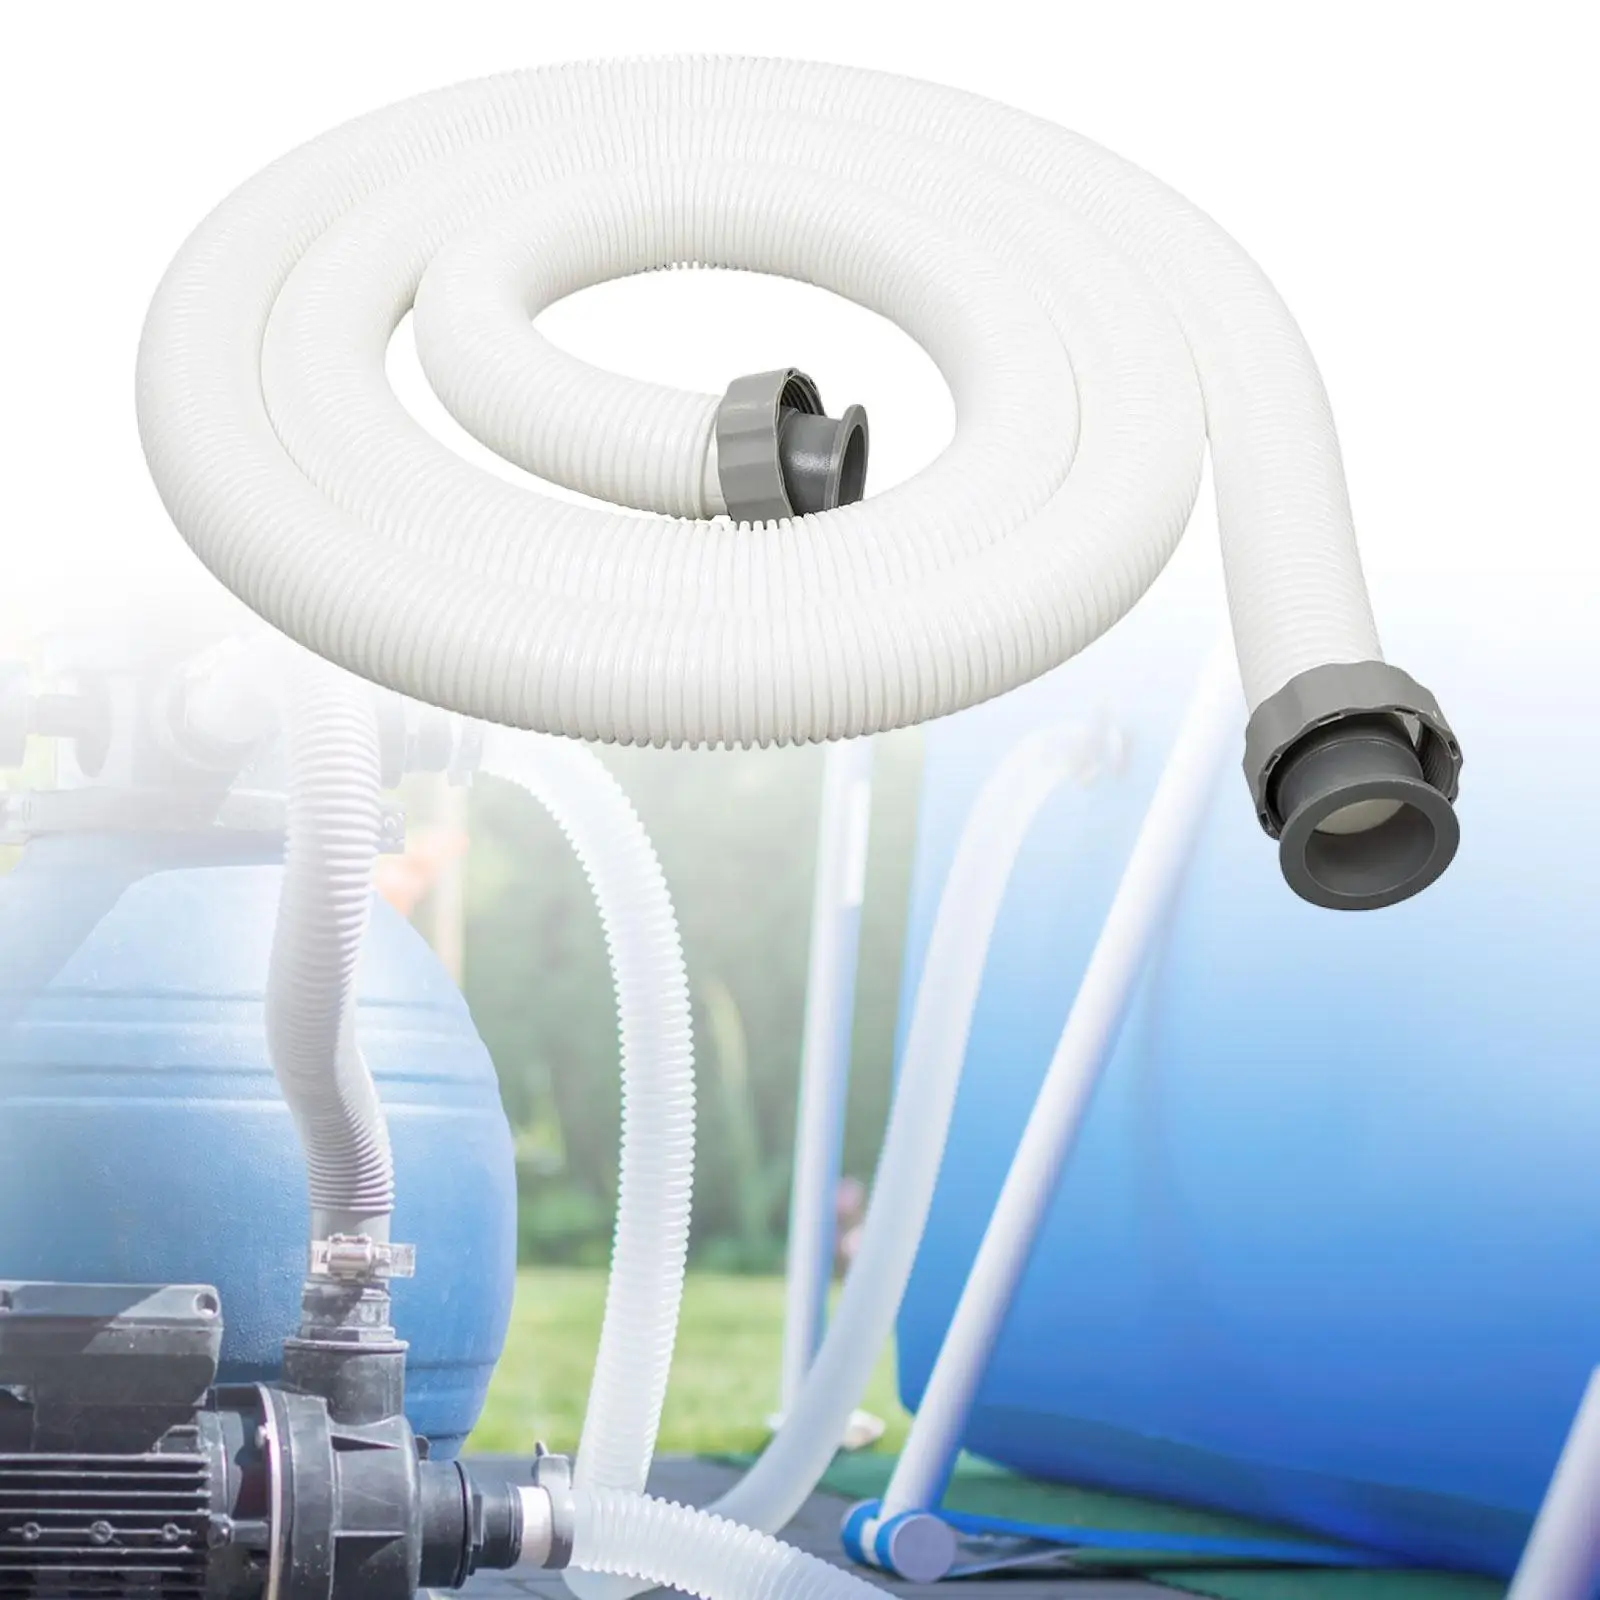 Interconnecting Hose Equipment SaltWater Pump Hose Tube Pool Sand Filter Pump Hose for Patio SPA Hot Tubs Pool Pump Garden Pool